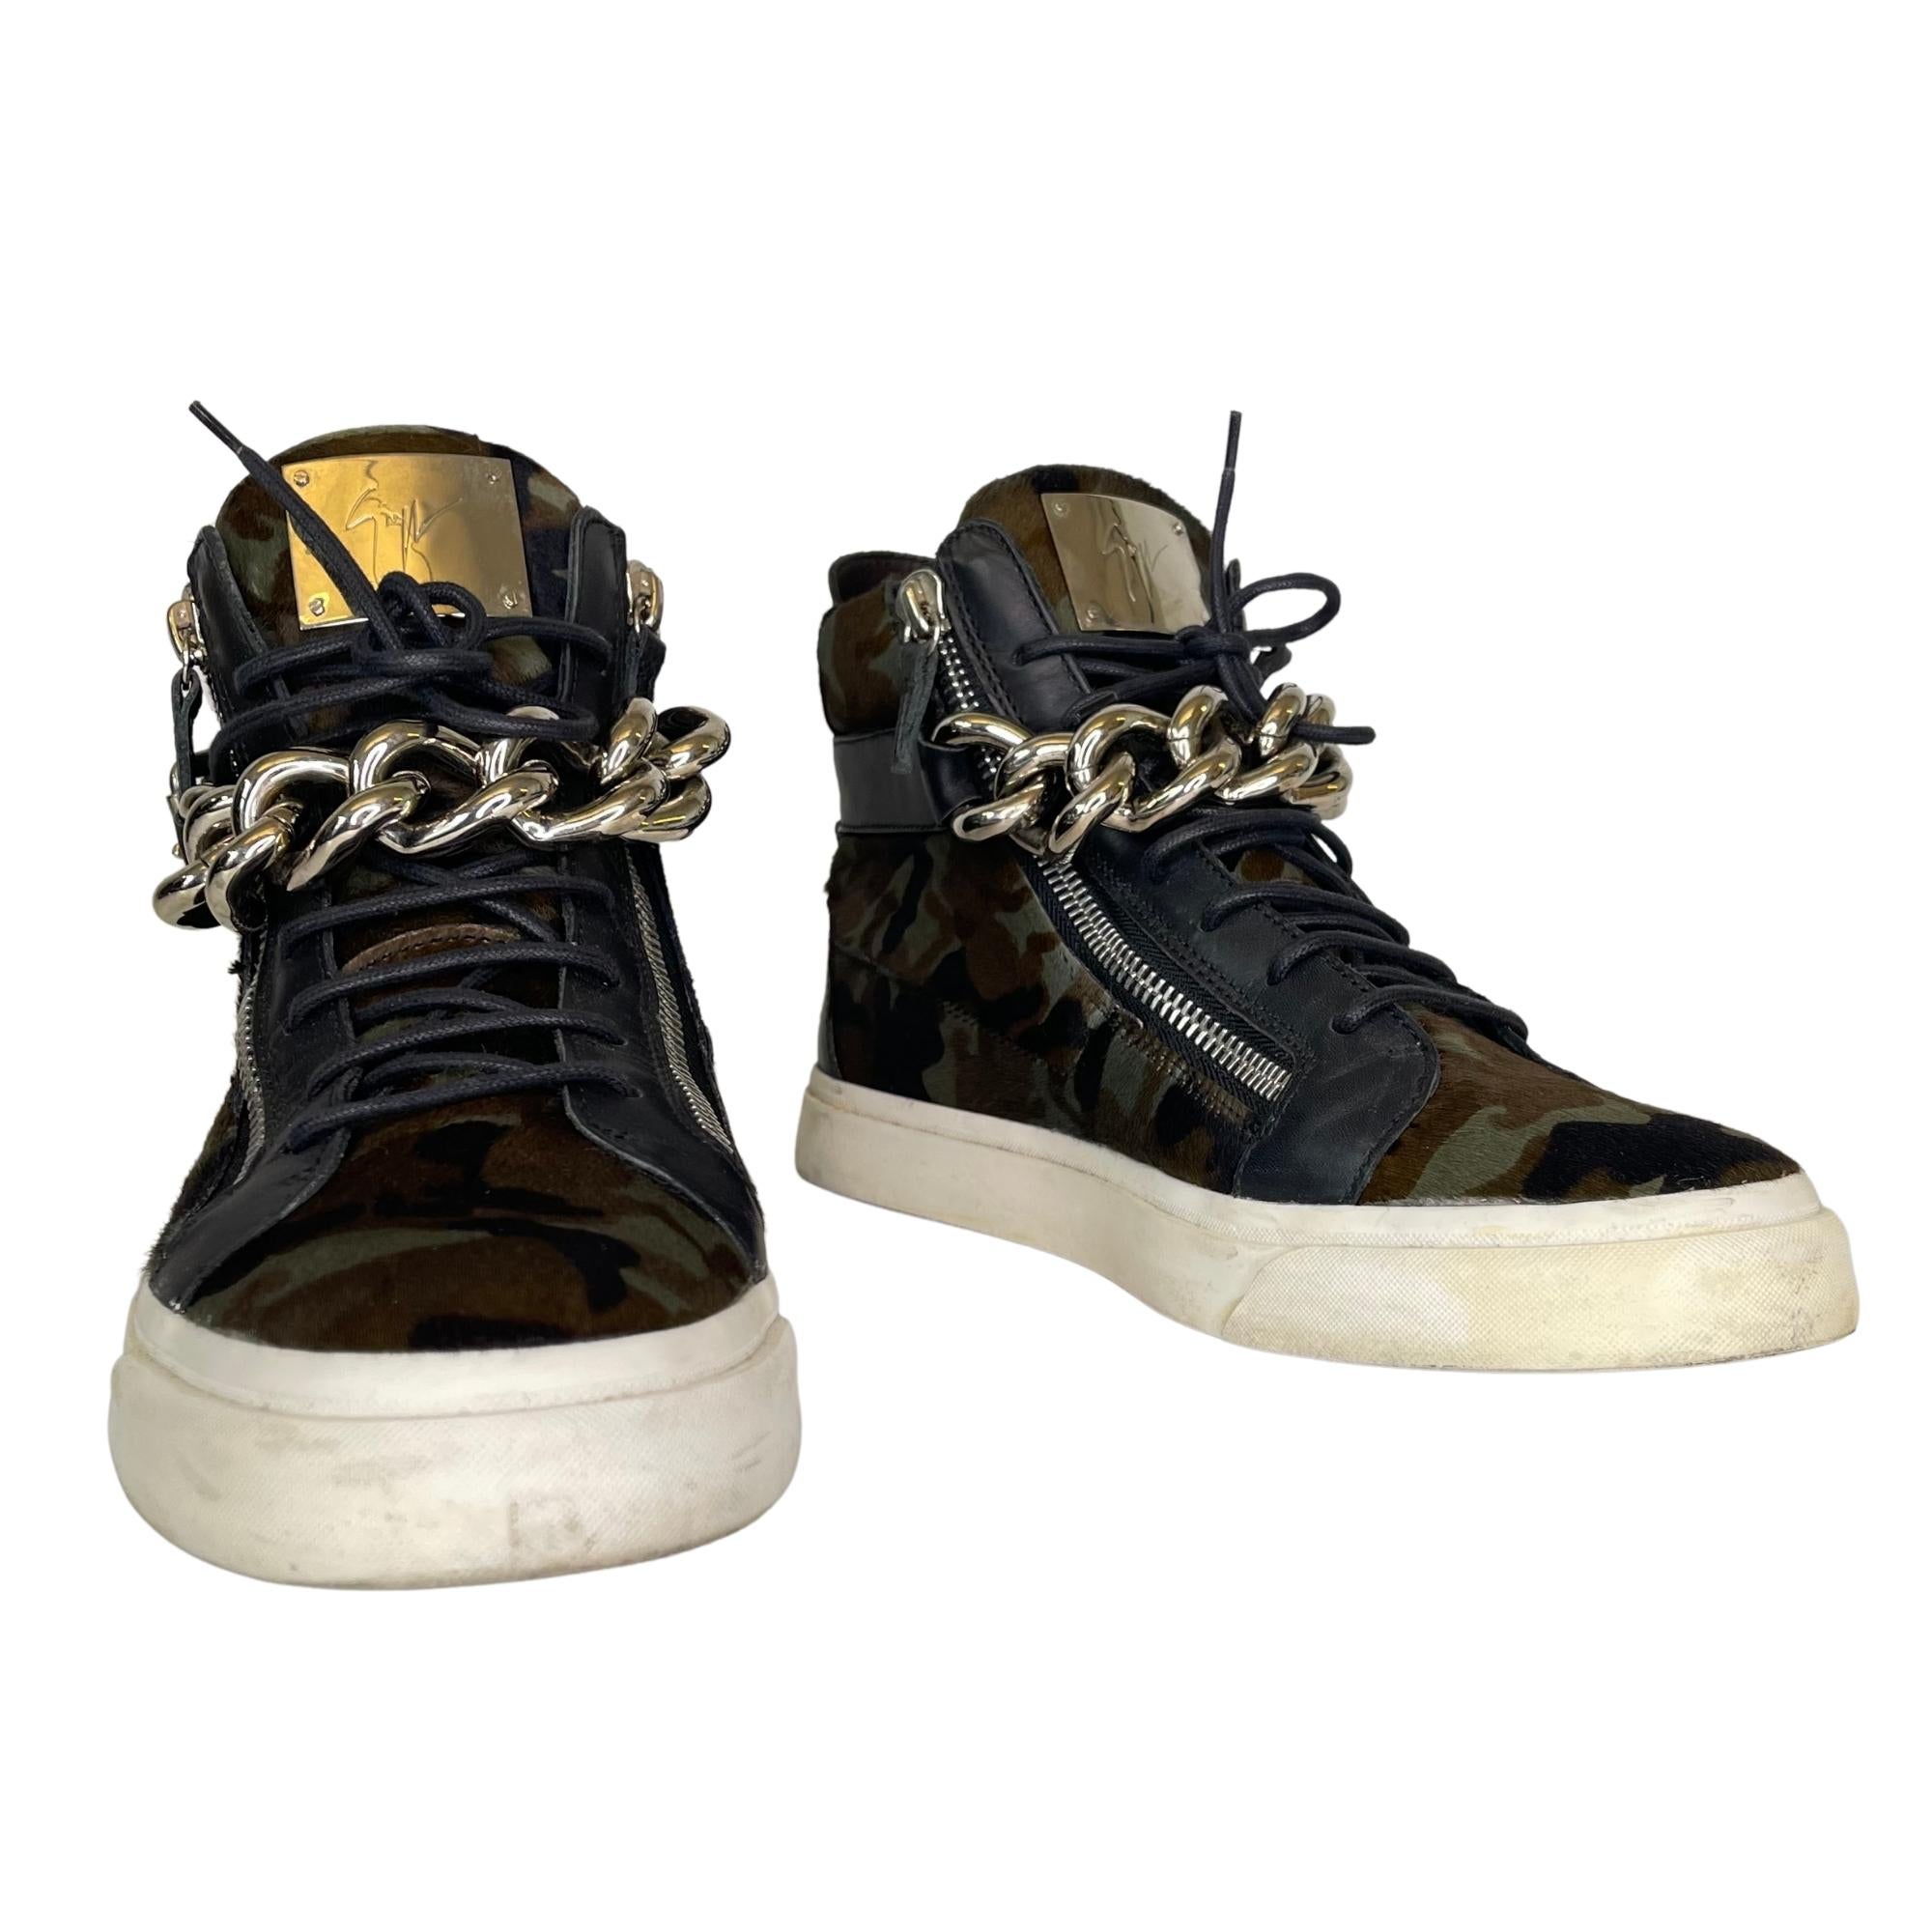 Made from calf hair, these sneakers come flaunting suave details like the chunky chains over the laces and the zippers.

COLOR: Camouflage/ Green and black
MATERIAL: Calf hair
SIZE: 43 EU / 10 US
COMES WITH: Dust bag and box
CONDITION: Good - the